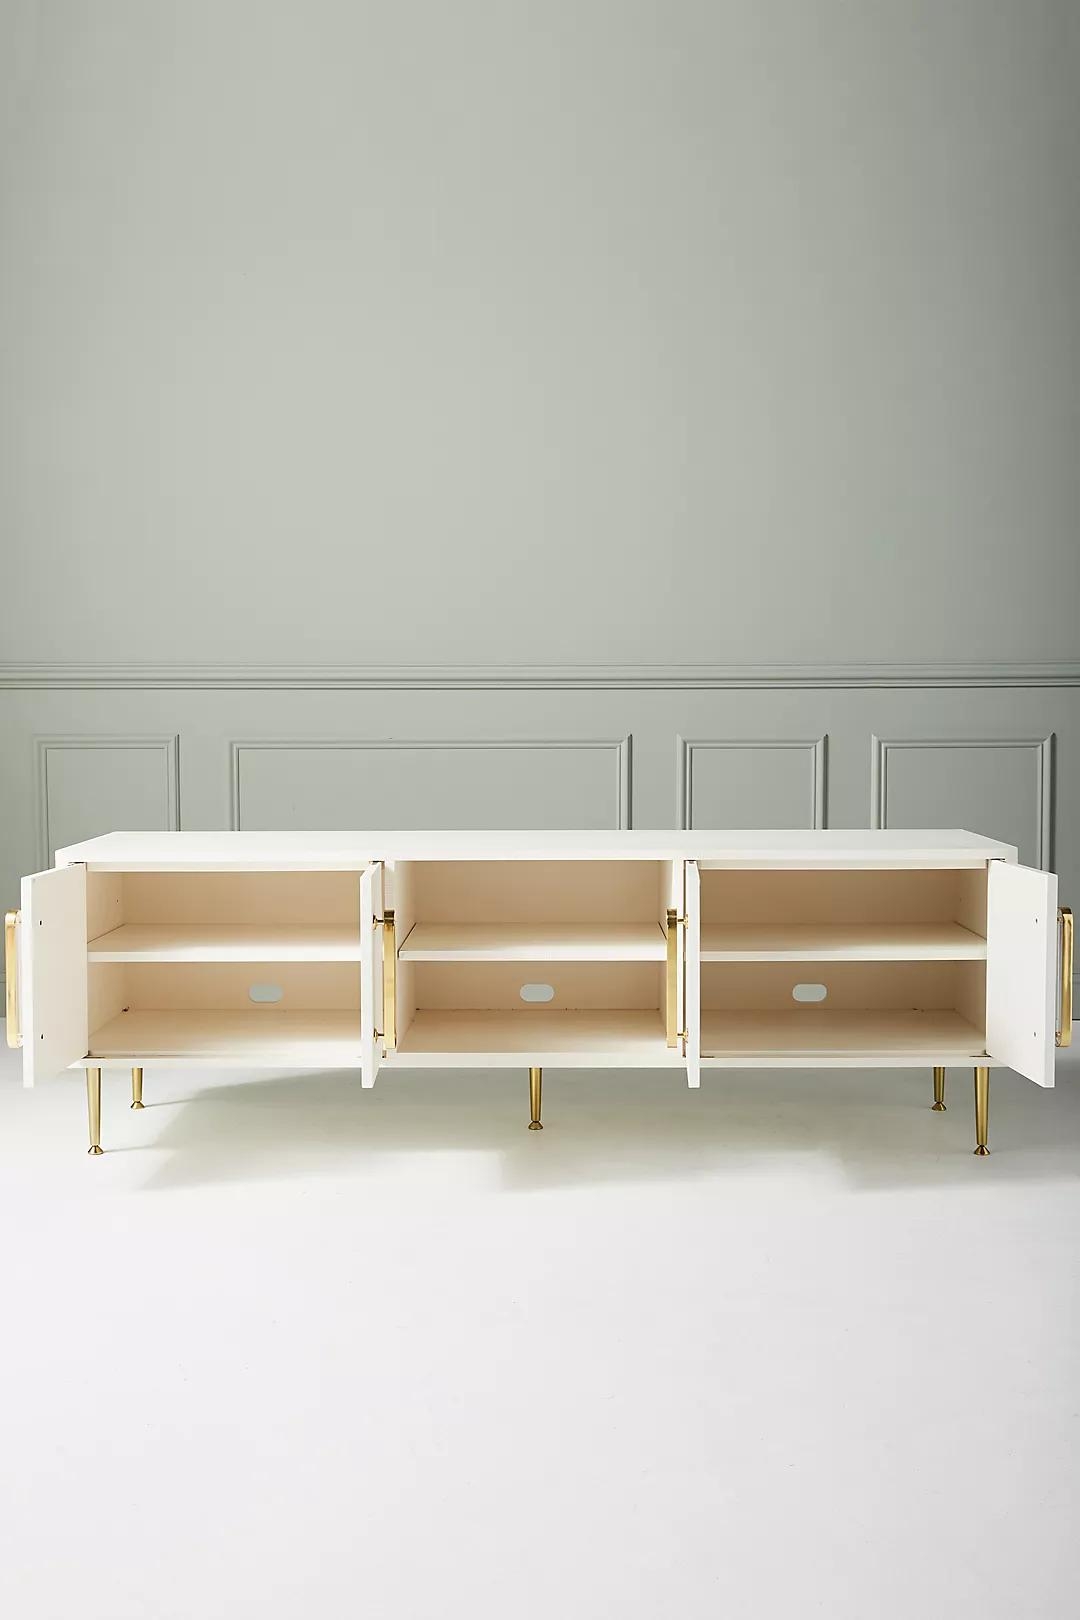 Odetta Media Console By Tracey Boyd in Beige - Image 2